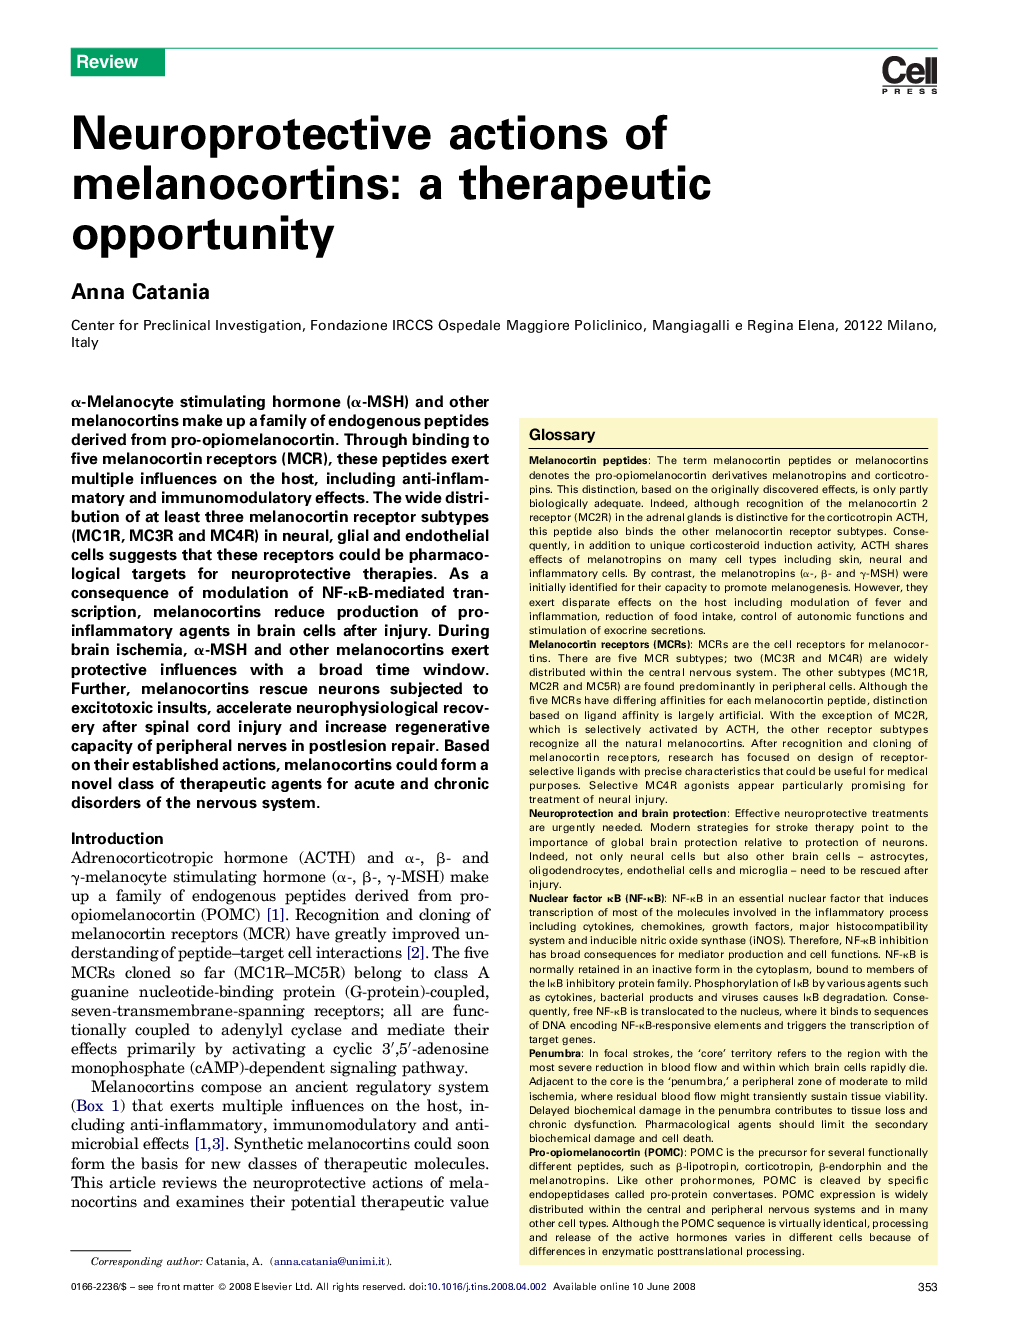 Neuroprotective actions of melanocortins: a therapeutic opportunity